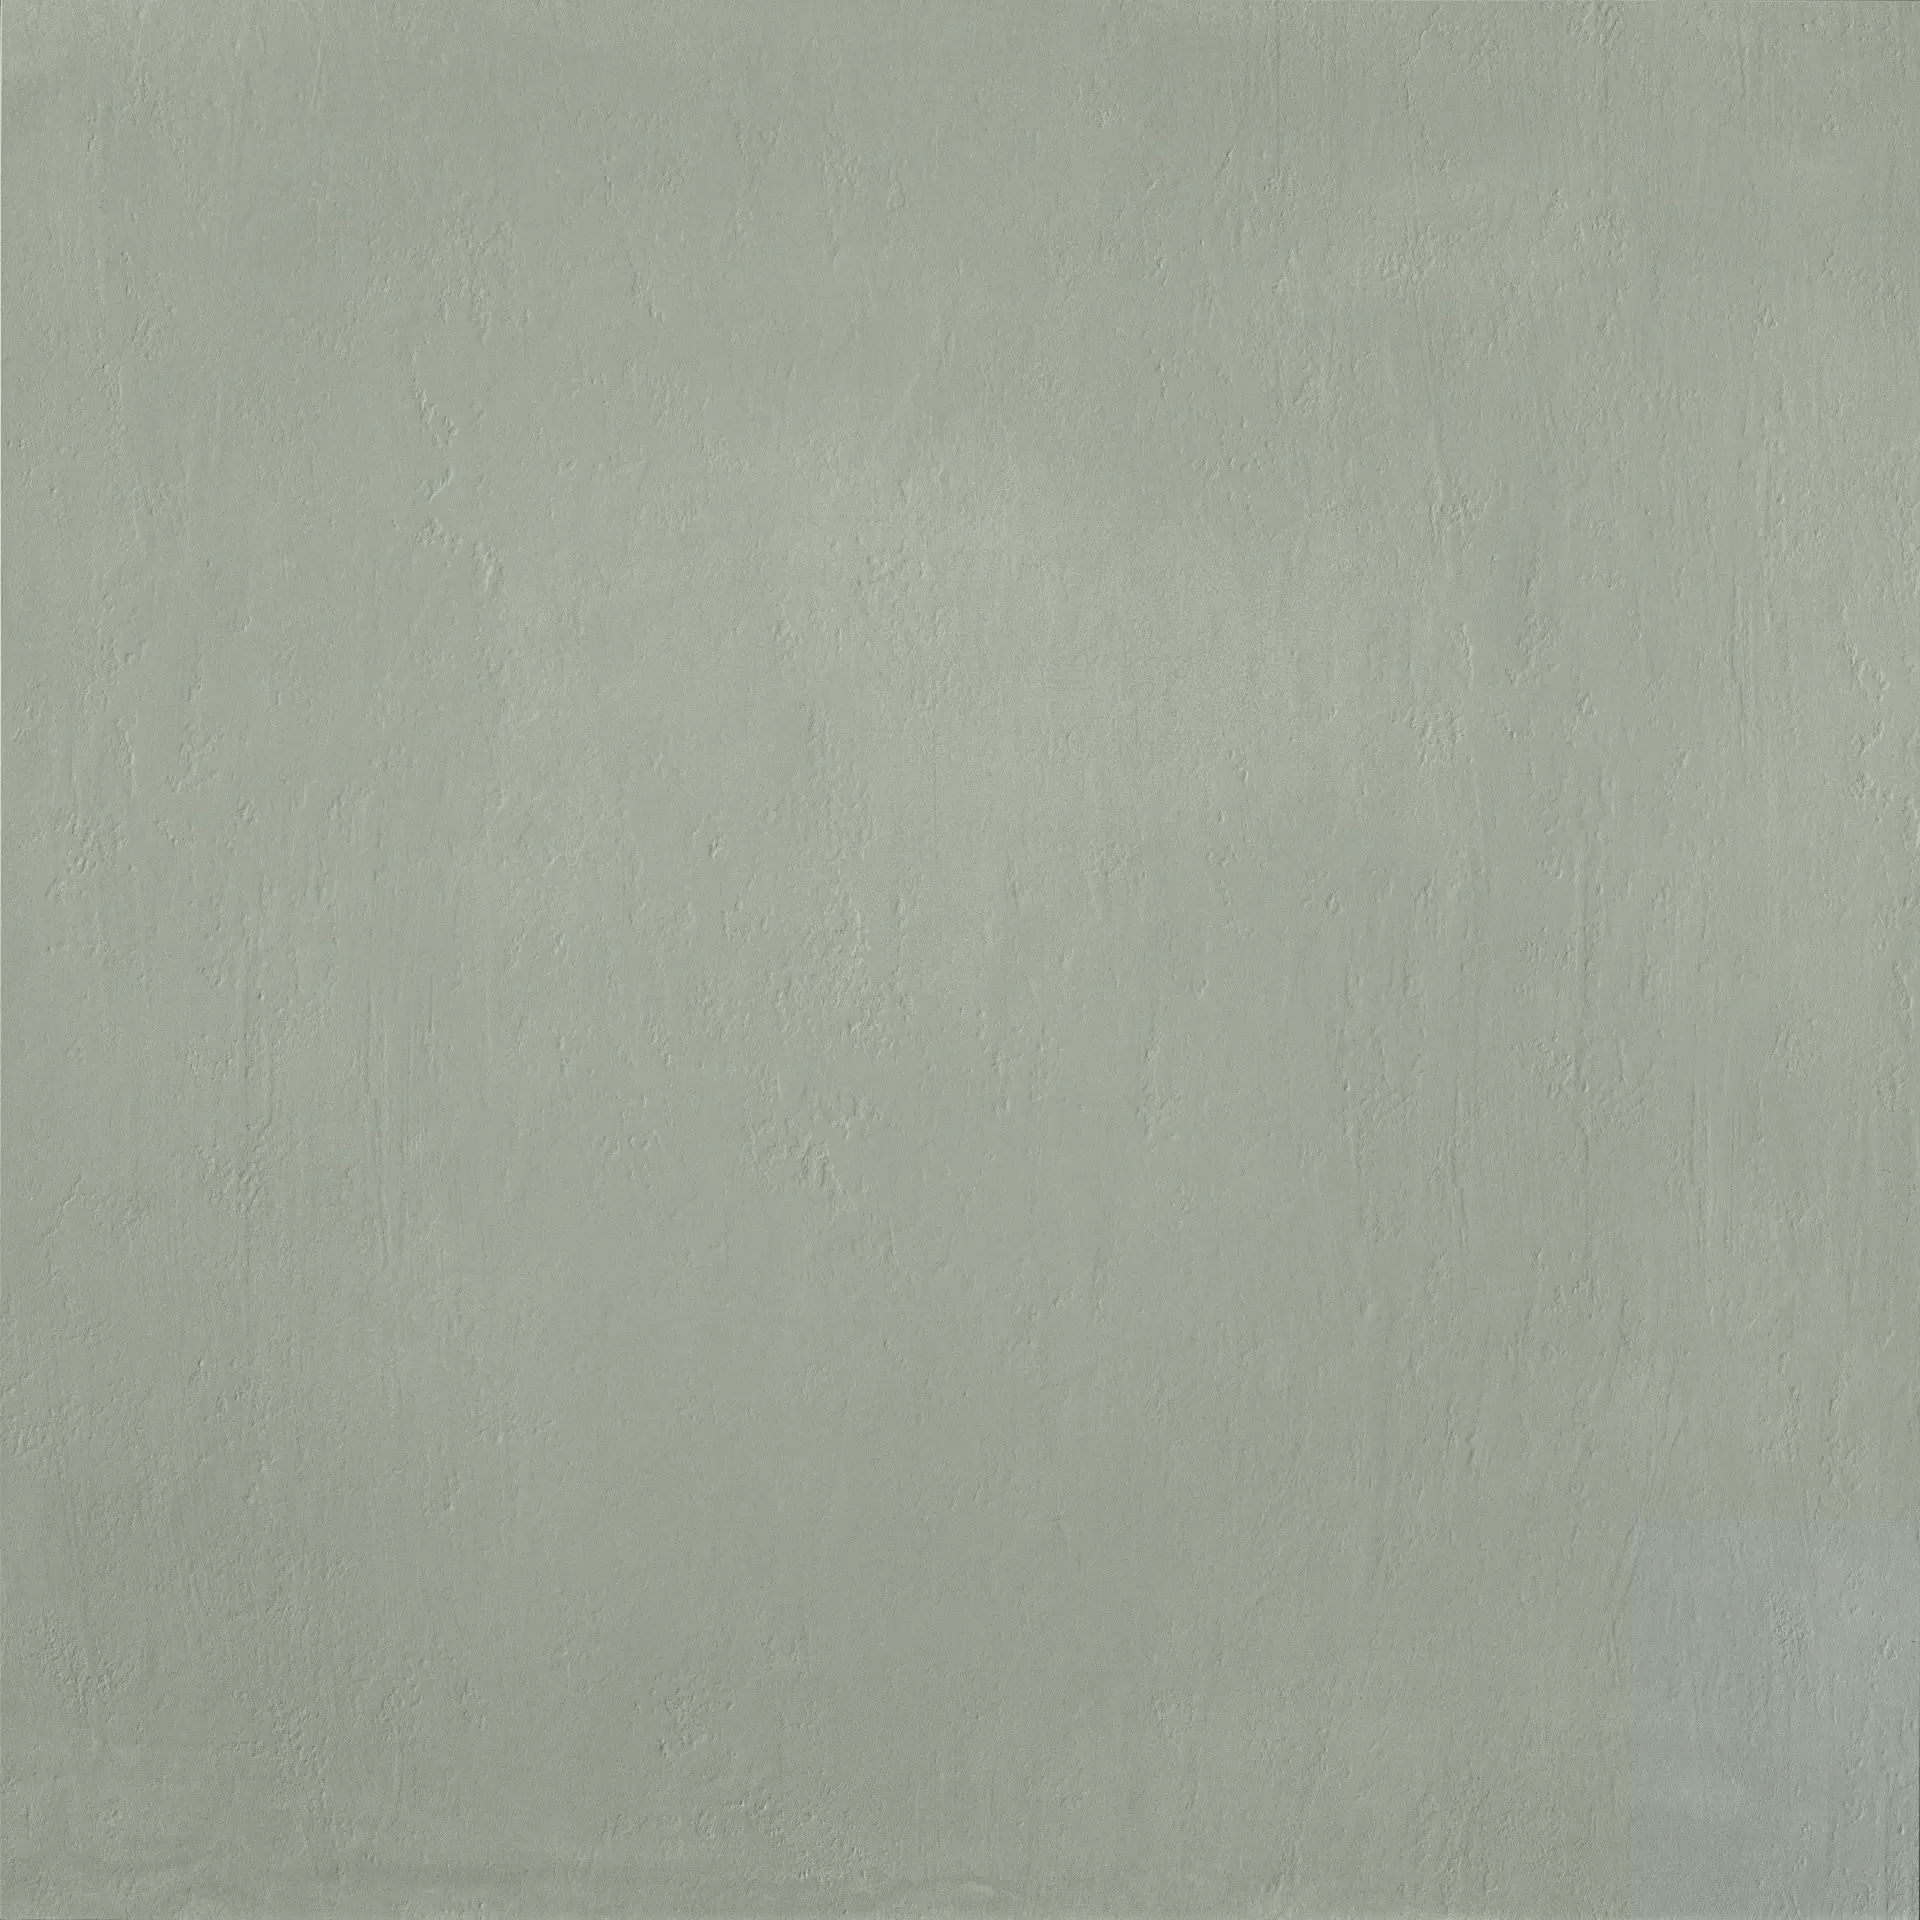 Cercom To Be Grigio Naturale 1061448 60x60cm rectified 10mm